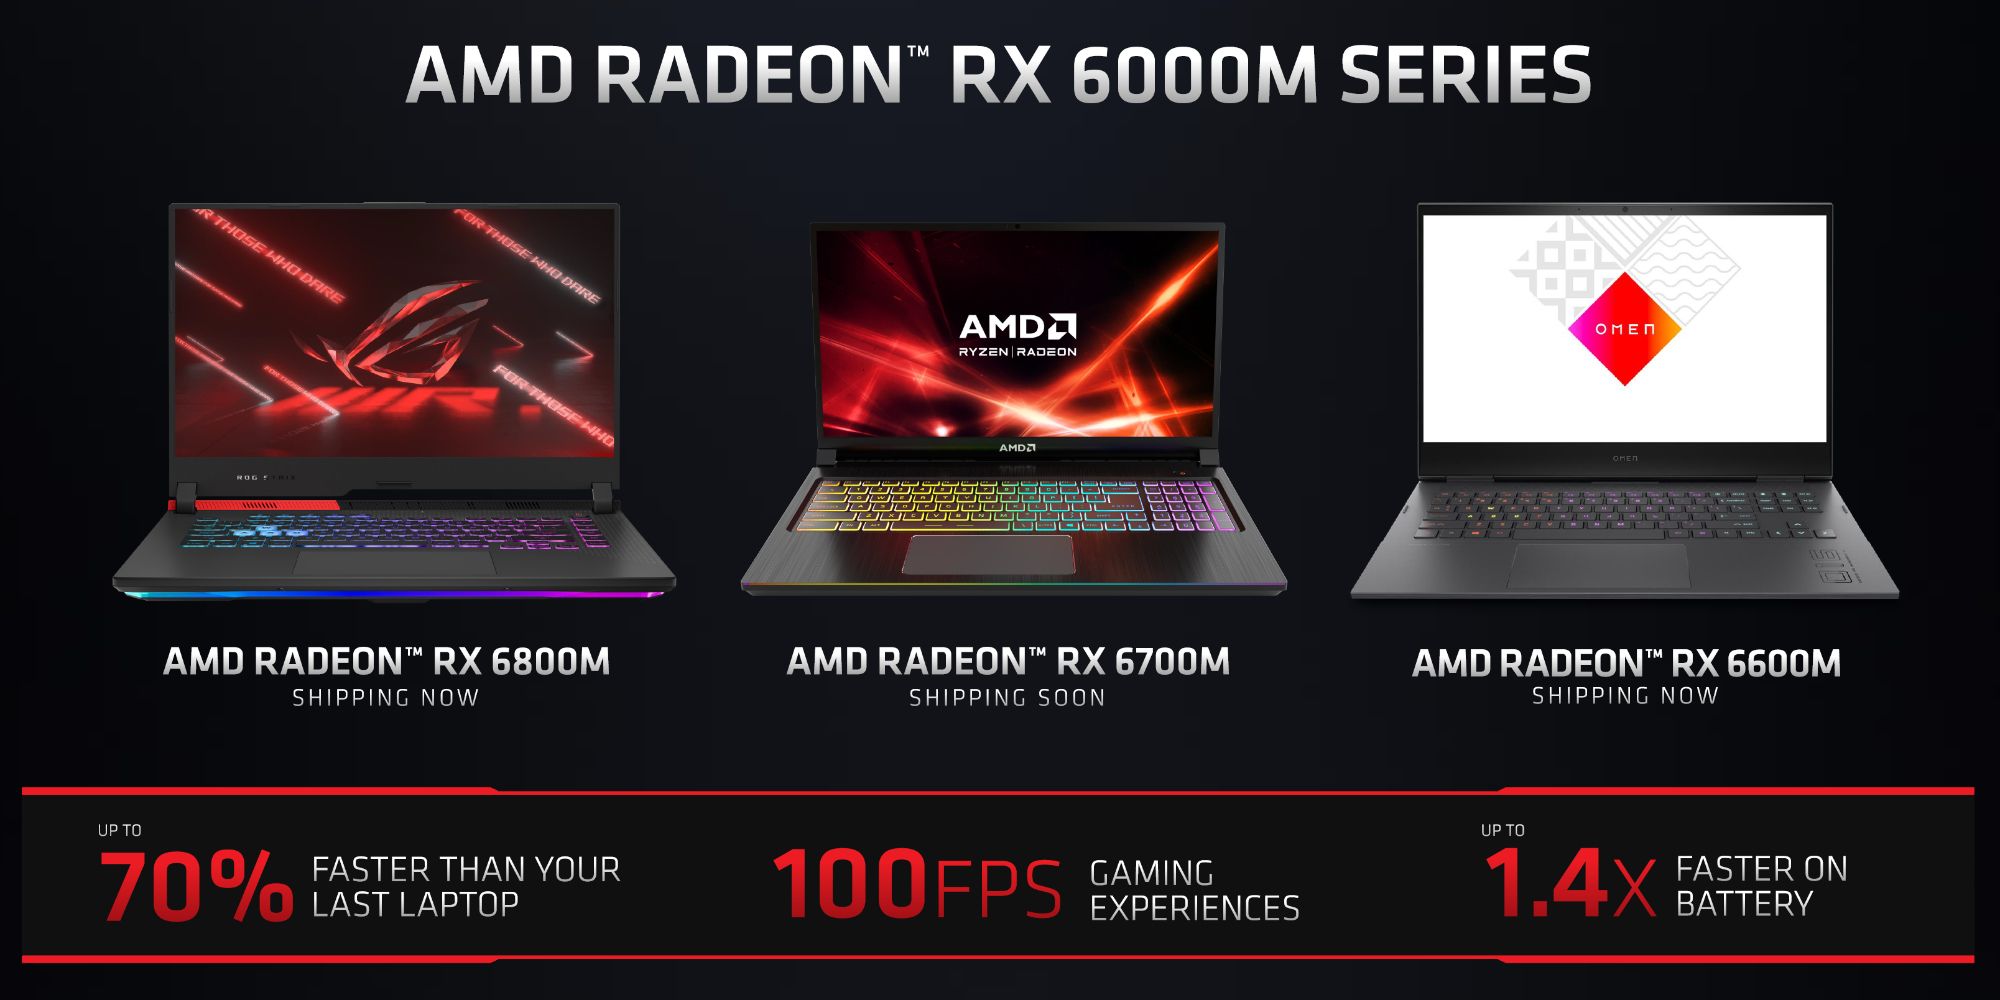 What AMD’s New Radeon RX 6000M Series Means For Gaming Laptops